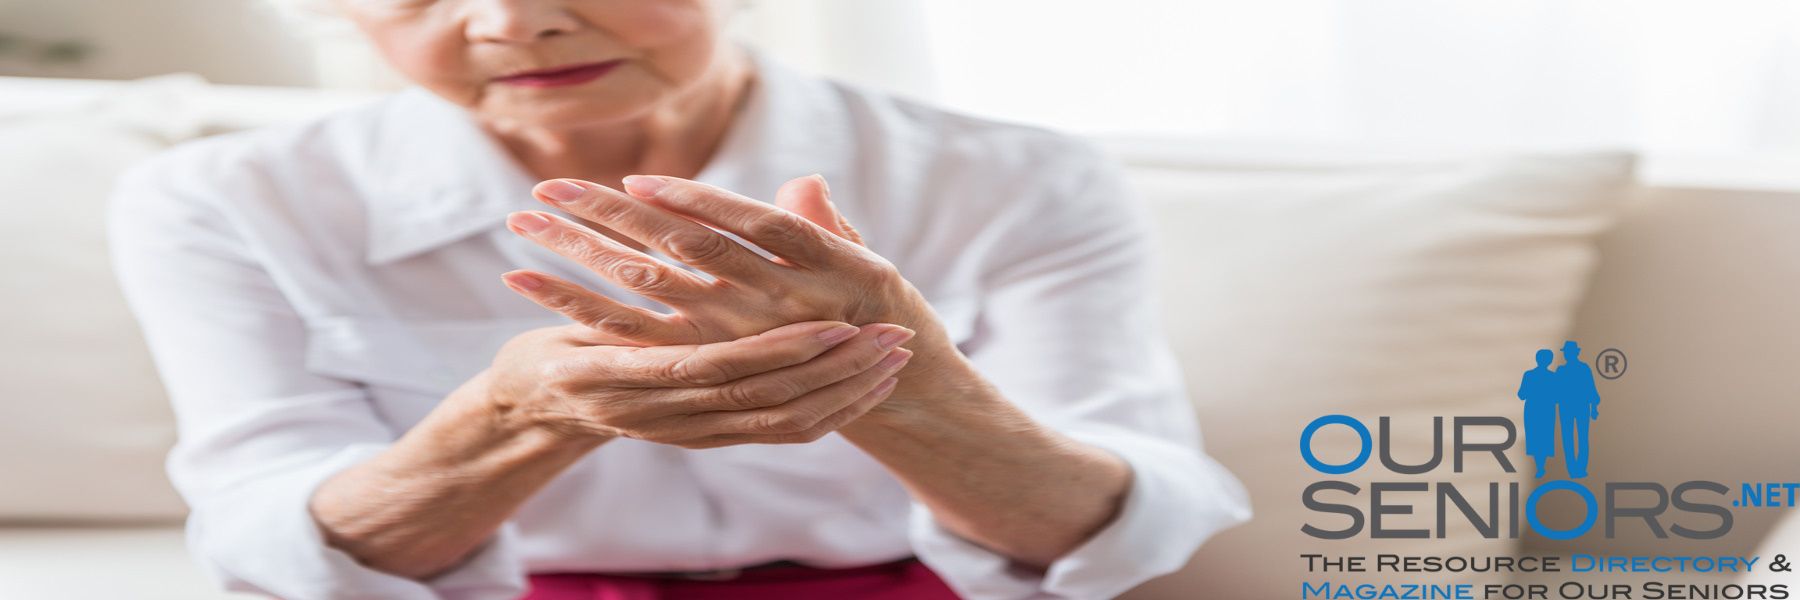 ourseniors.net-5 Things That You Might Not Have Known Can Help With Arthritis